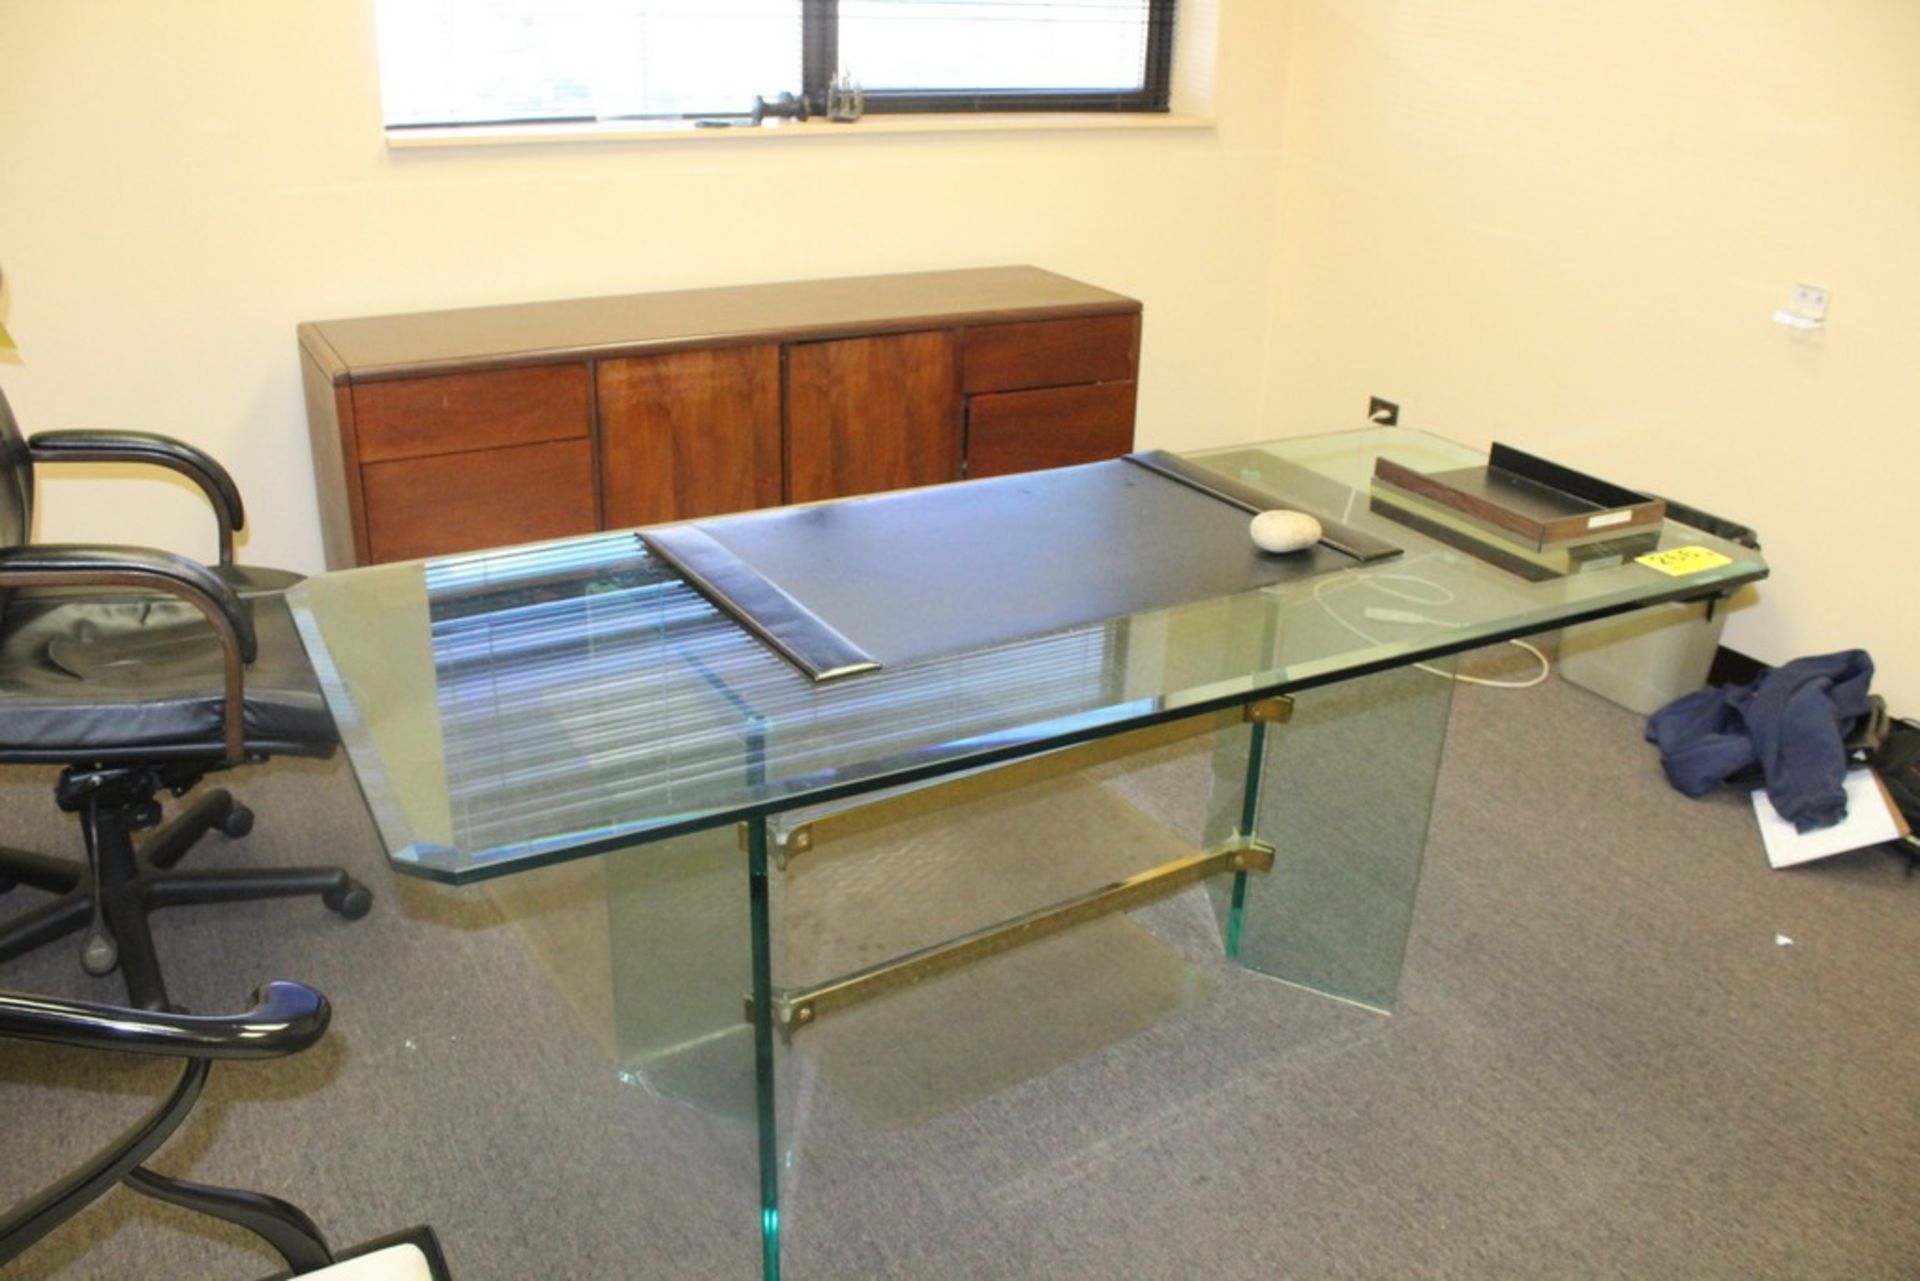 GLASS EXECUTIVE DESK - 72" X 30" X 29" AND WOOD CREDENZA - 29" X 72" X 20" - Image 2 of 3